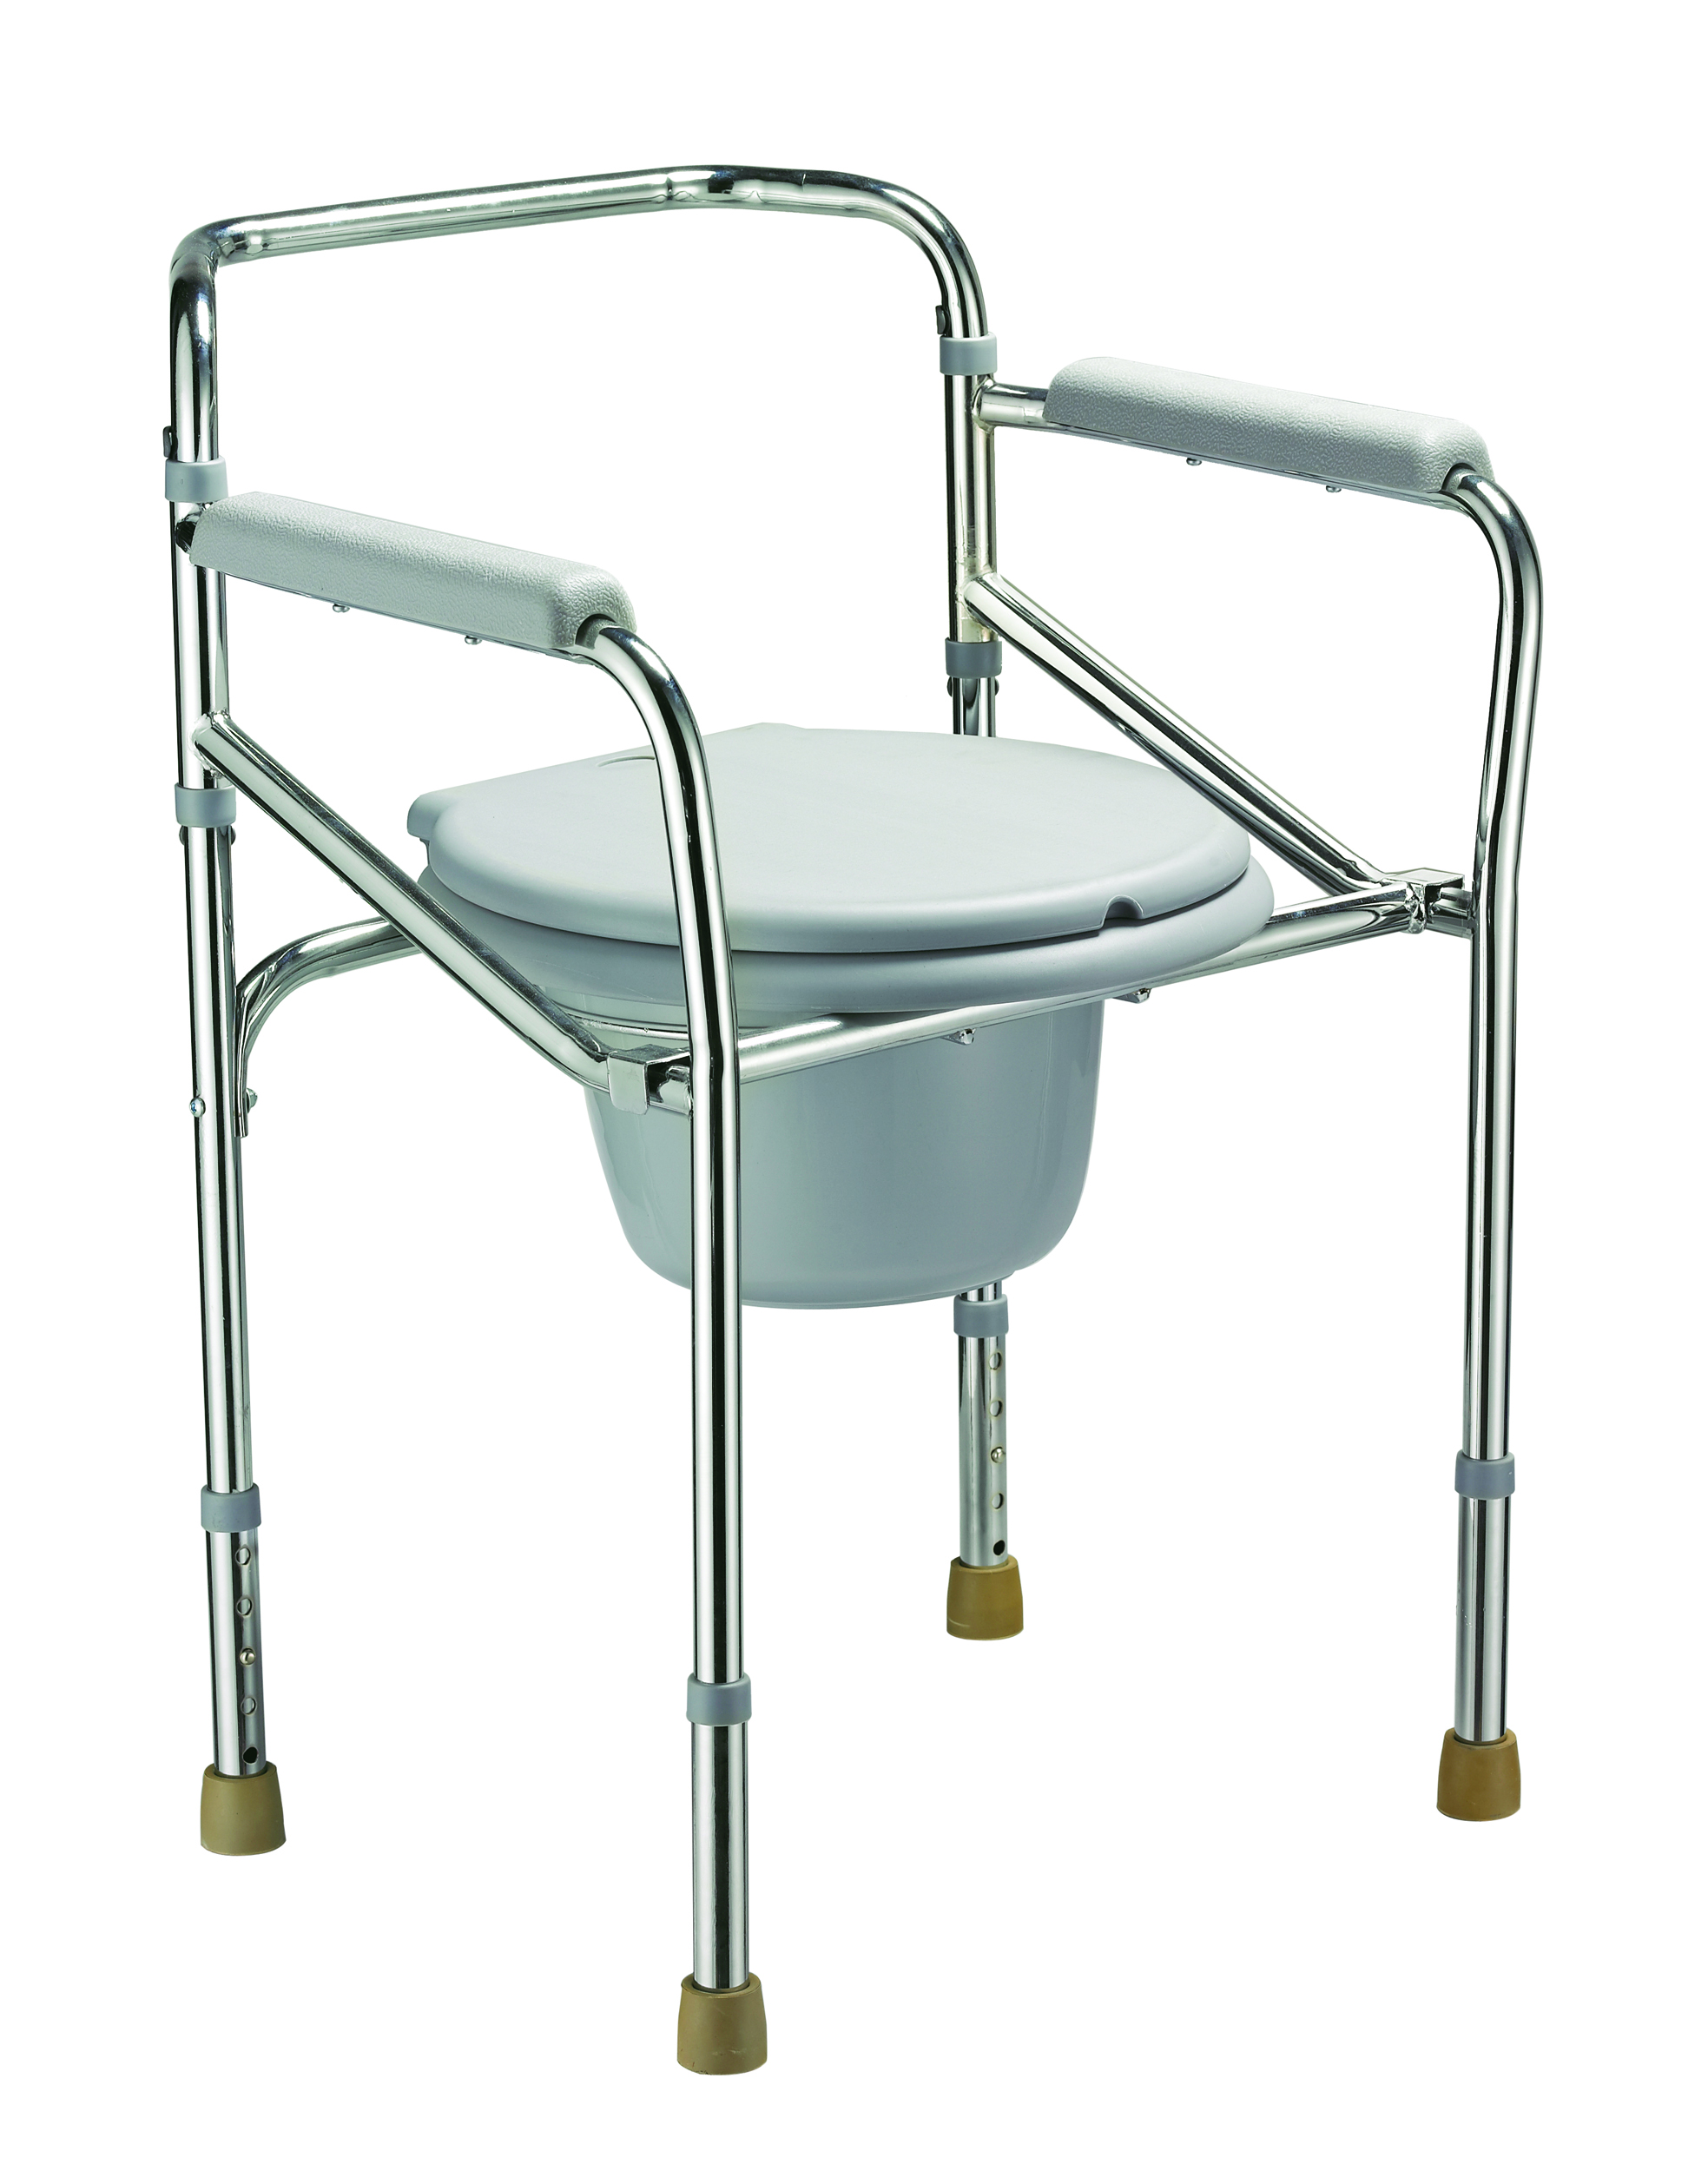 Aluminum Foding Adjustable Commode Chair for Disabled People Orthotics Class I 1 YEAR Free Spare Parts 15-20 Days CE/ISO13485